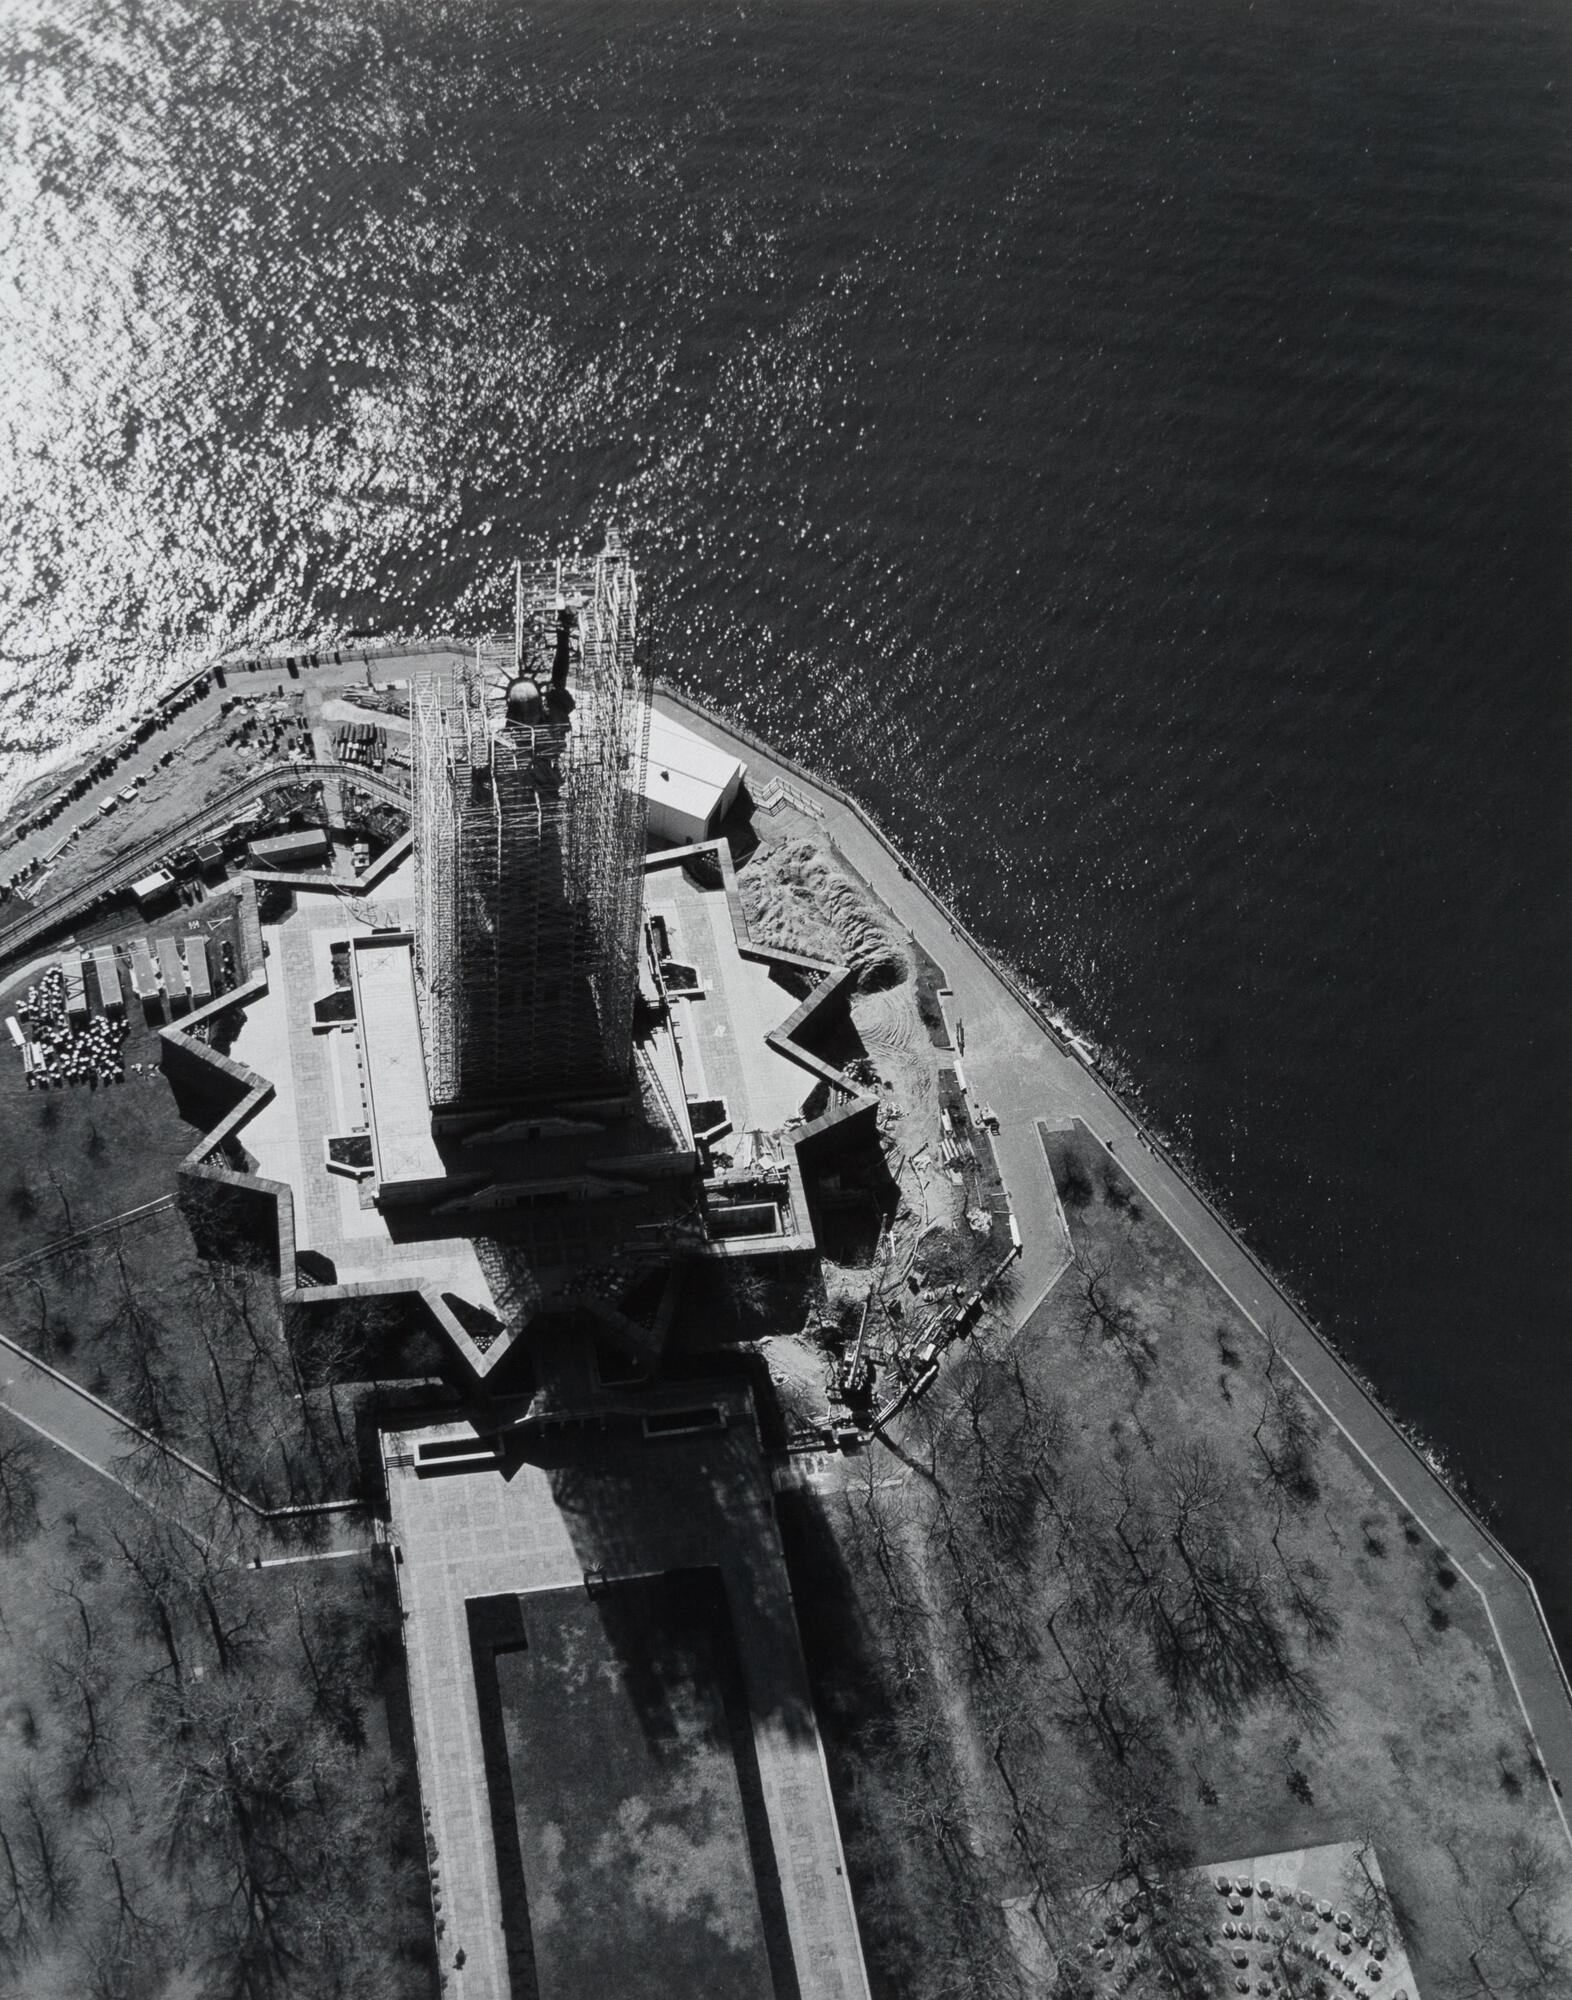 This photograph depicts an aerial view of a statue surrounded by construction scaffolding on an island surrounded by water. 